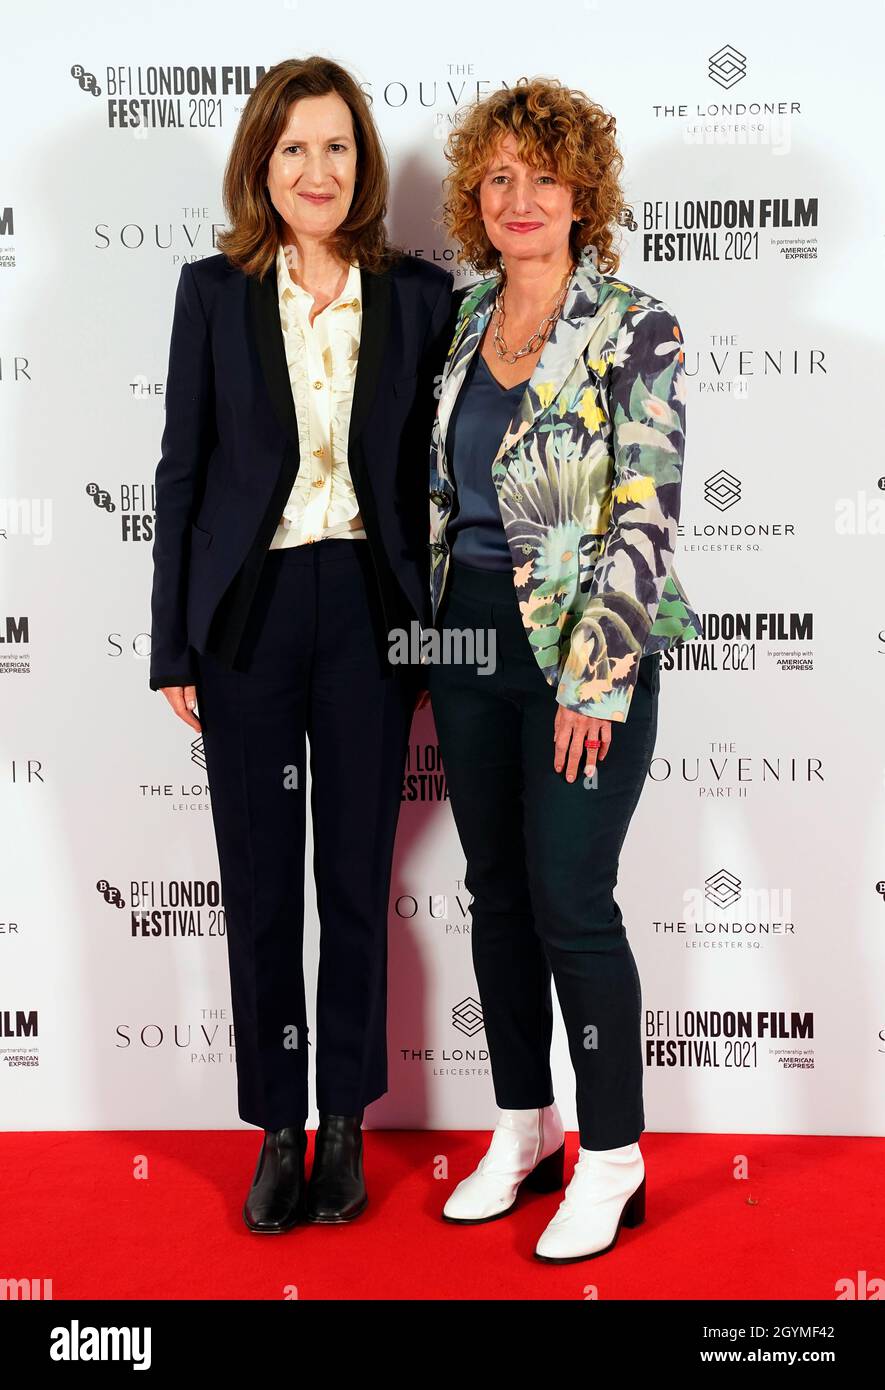 Joanna Hogg (left) and Tricia Tuttle arrive for the UK premiere of The Souvenir: Part II, at the Royal Festival Hall in London during the BFI London Film Festival. Picture date: Friday October 8, 2021. Stock Photo